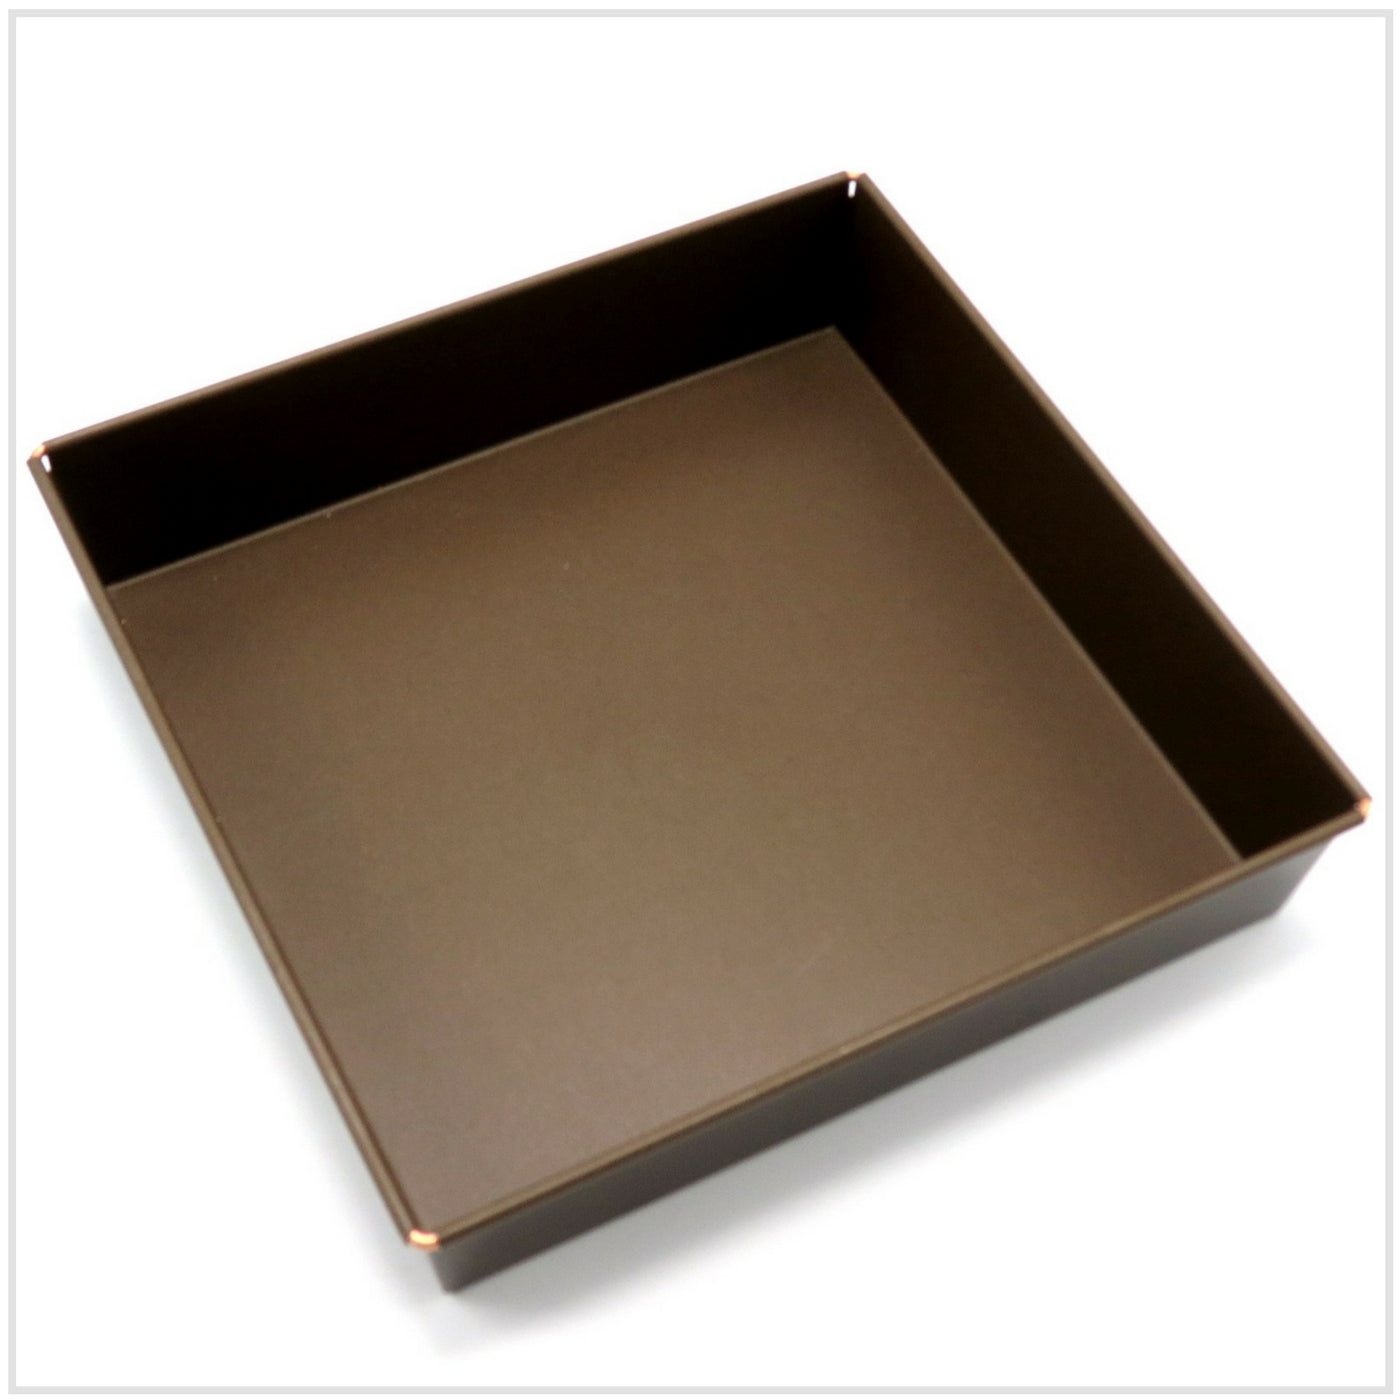 Gobel Square Cake Pan with Copper Wire 22cm